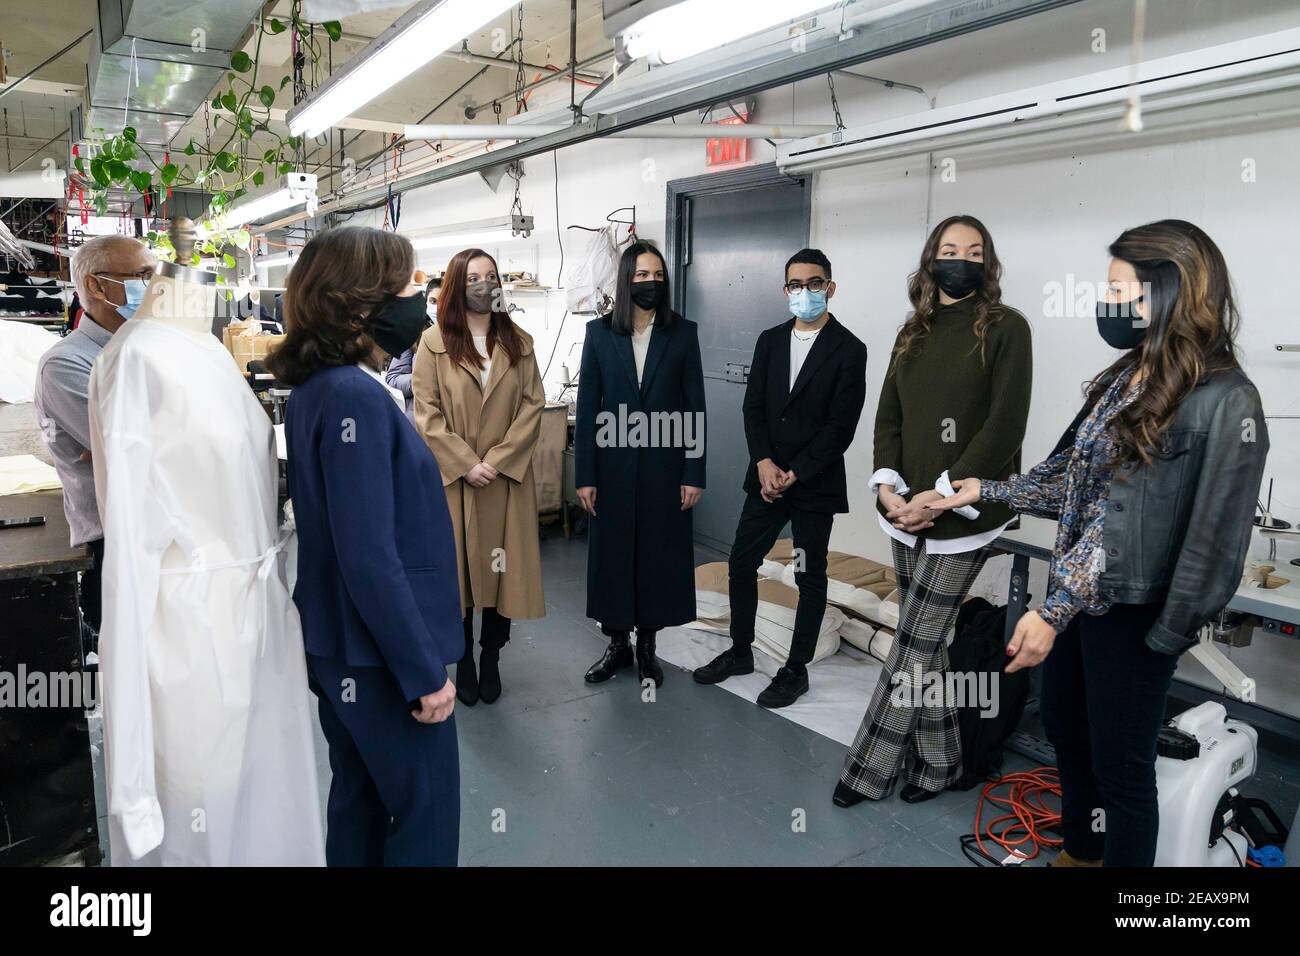 New York, United States. 10th Feb, 2021. LG Kathy Hochul visits Four Seasons Fashion as part of women-owned nonprofit Garment District for Gowns on 39th street of Manhattan in New York on February 10, 2021. LG was touring Four Season Fashion company owned by Tony Singh (L) and presented by women who started nonprofit Garment District for Gowns (from the right) Rachel Rothenberg, Amy Tiefermann, Emmanuel Nunez, Alessandra Dean, Alexandra Baylis. (Photo by Lev Radin/Sipa USA) Credit: Sipa USA/Alamy Live News Stock Photo